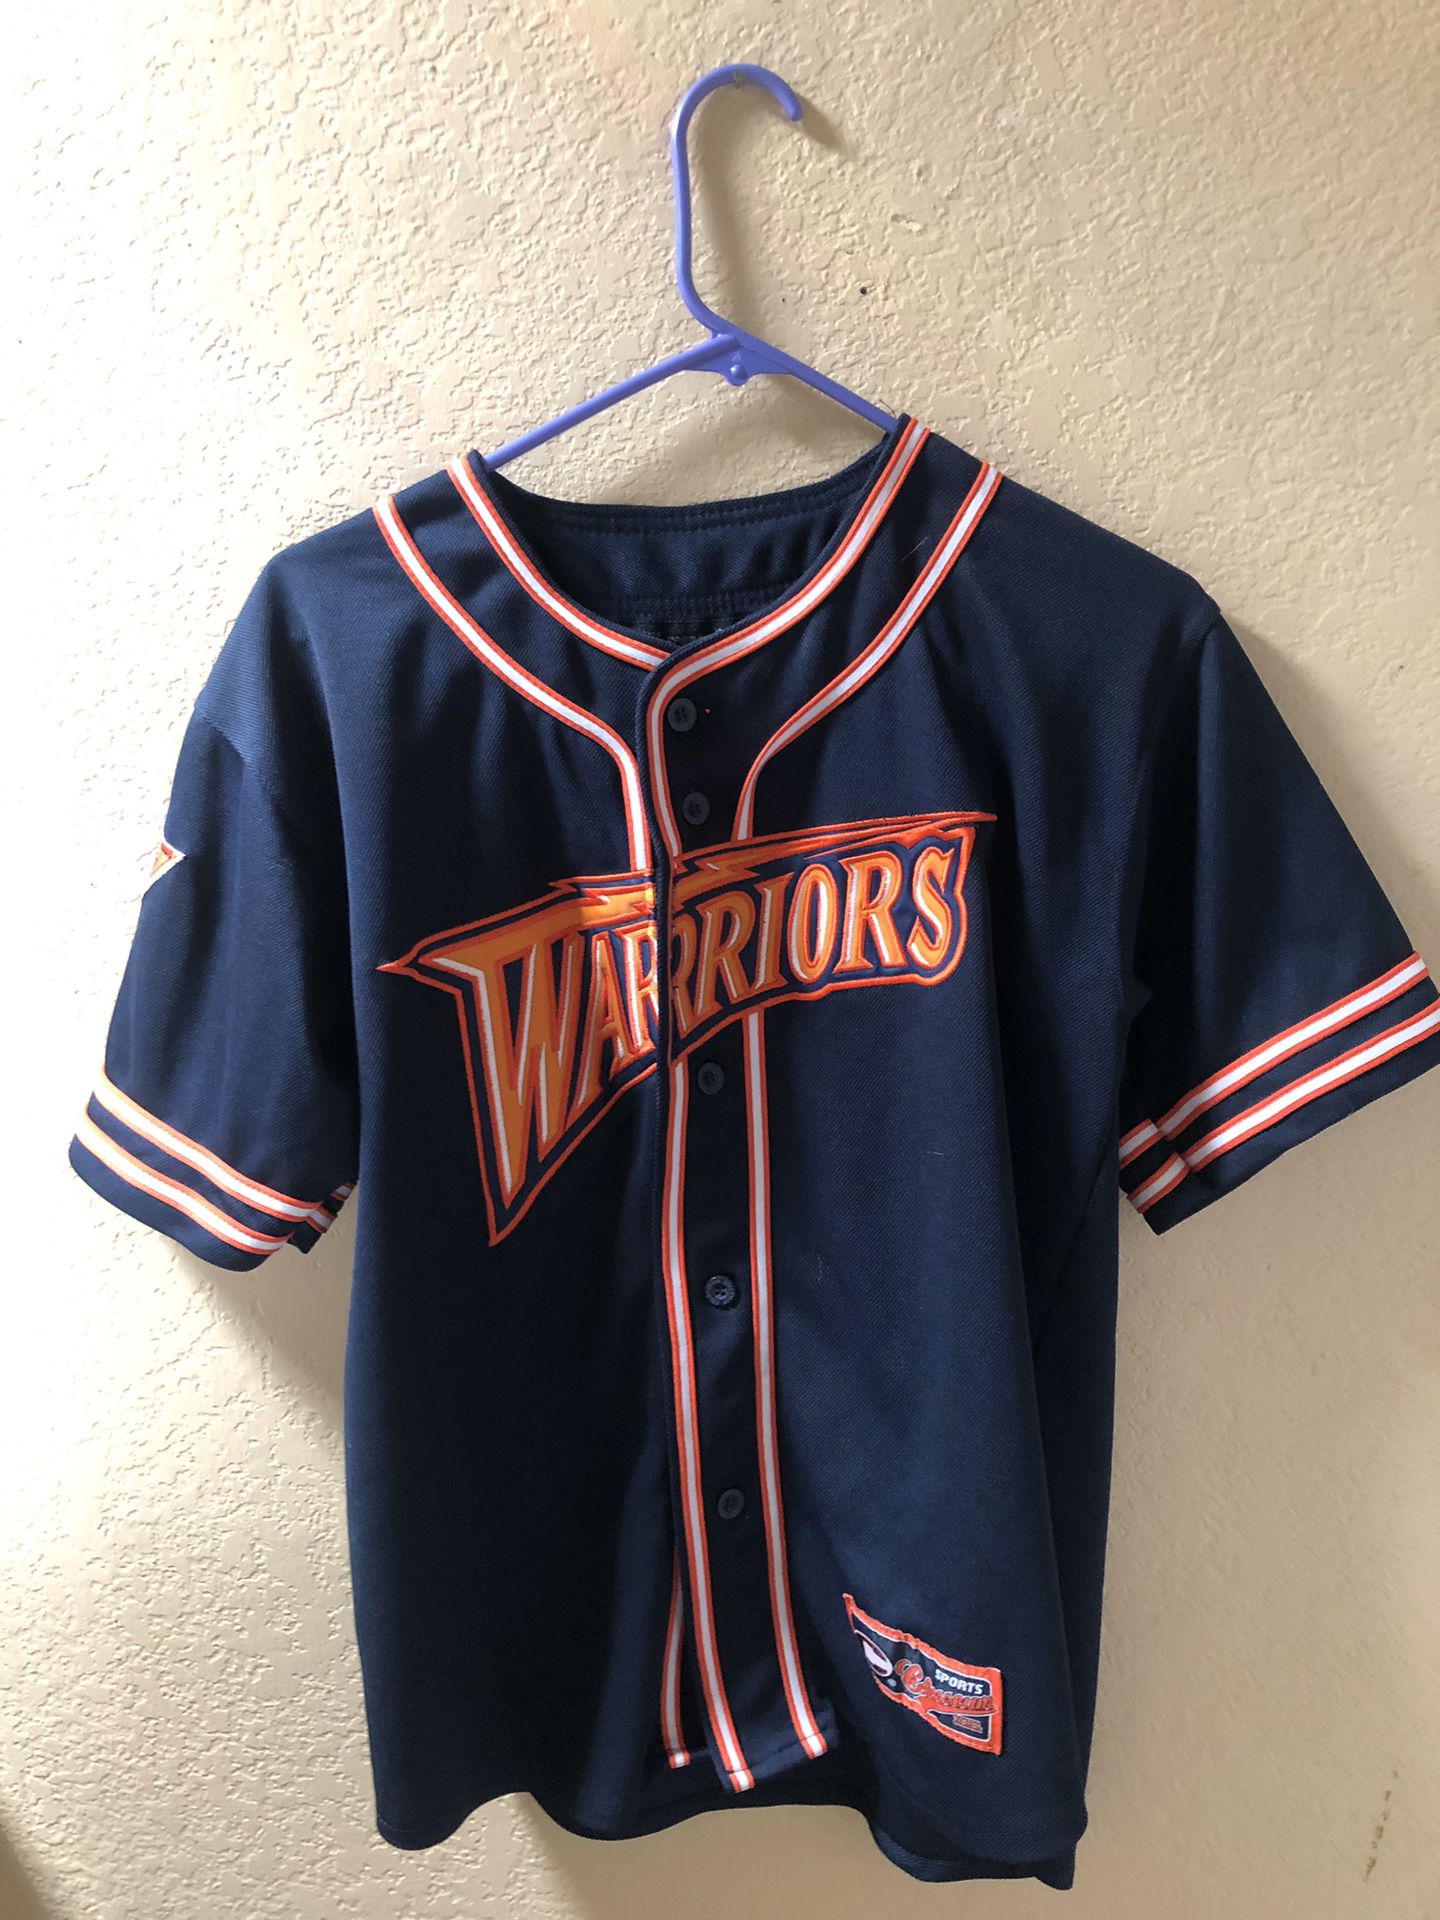 Golden state warriors jersey for Sale in San Lorenzo, CA - OfferUp